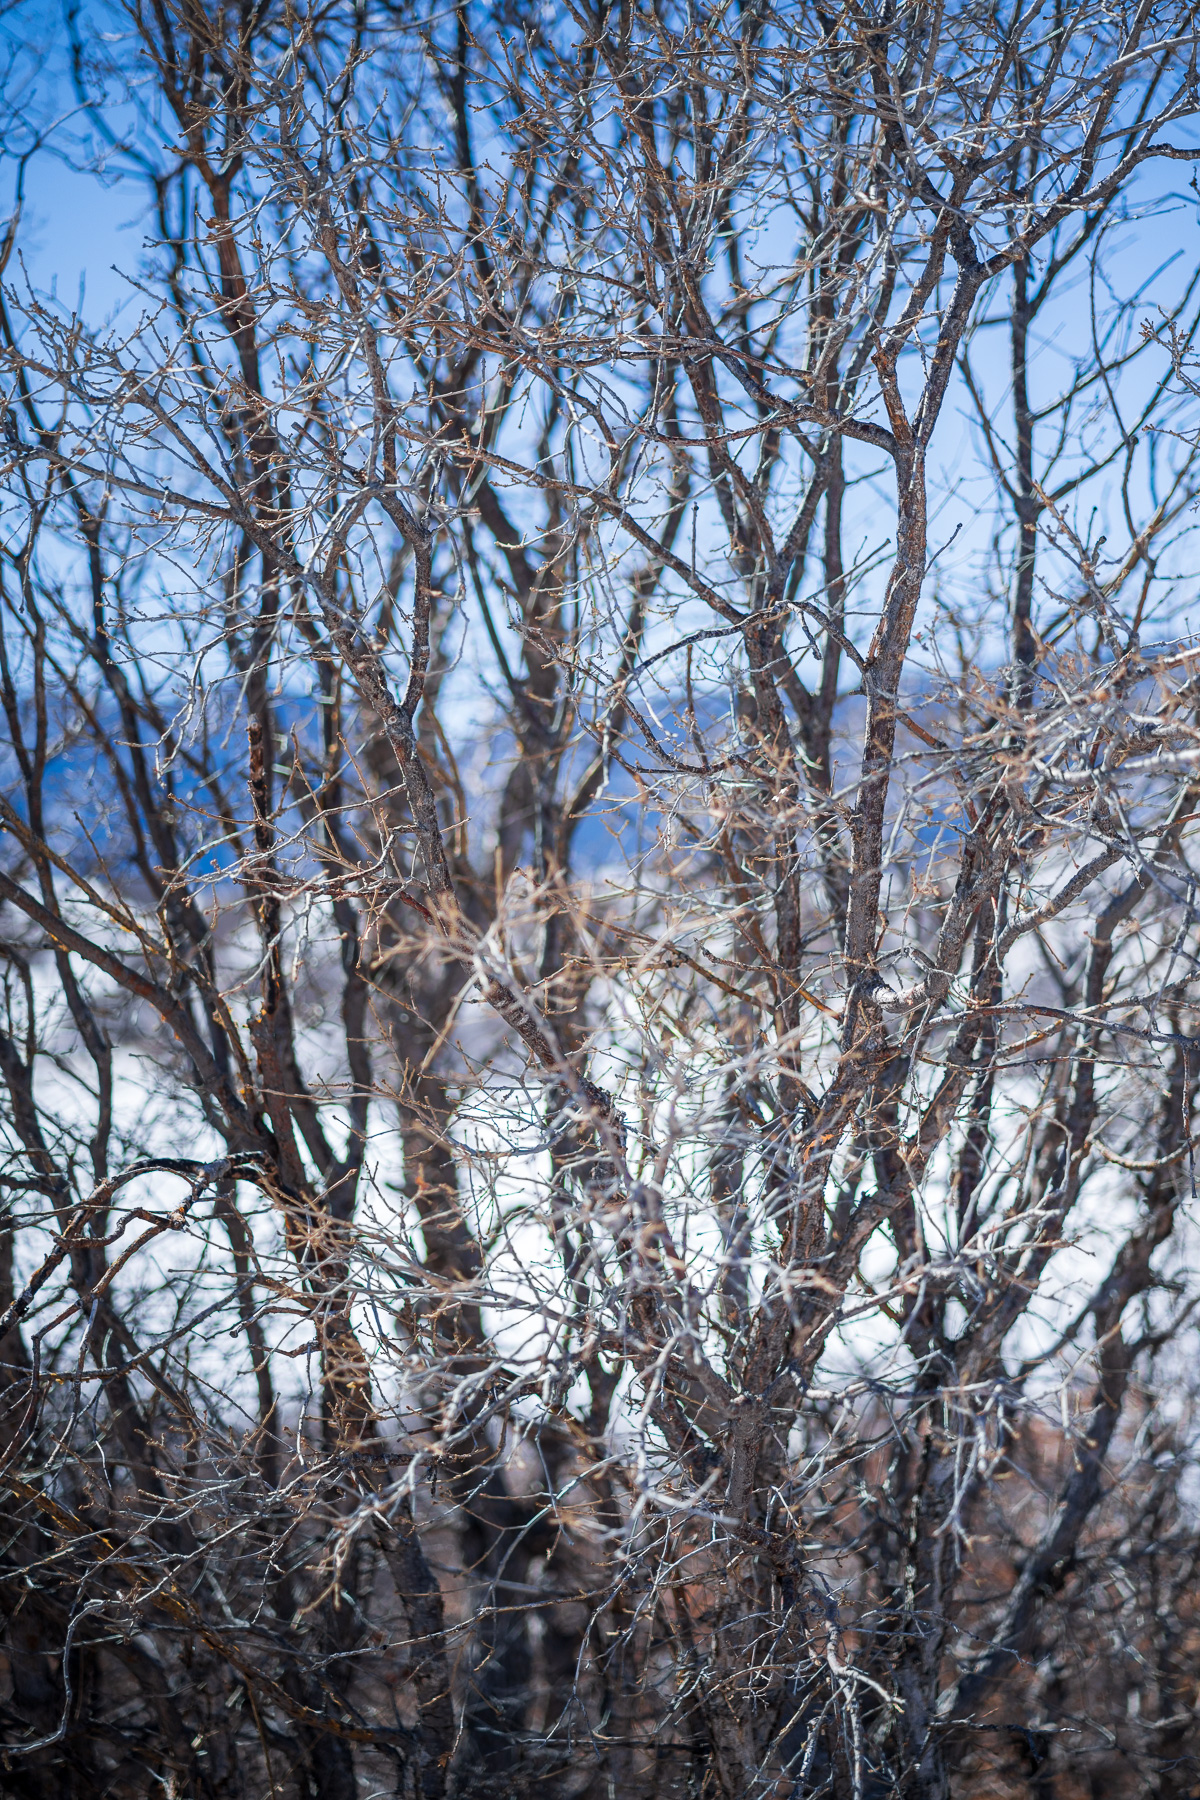 in focus, a tree, with out-of-focus mountains visible behind it